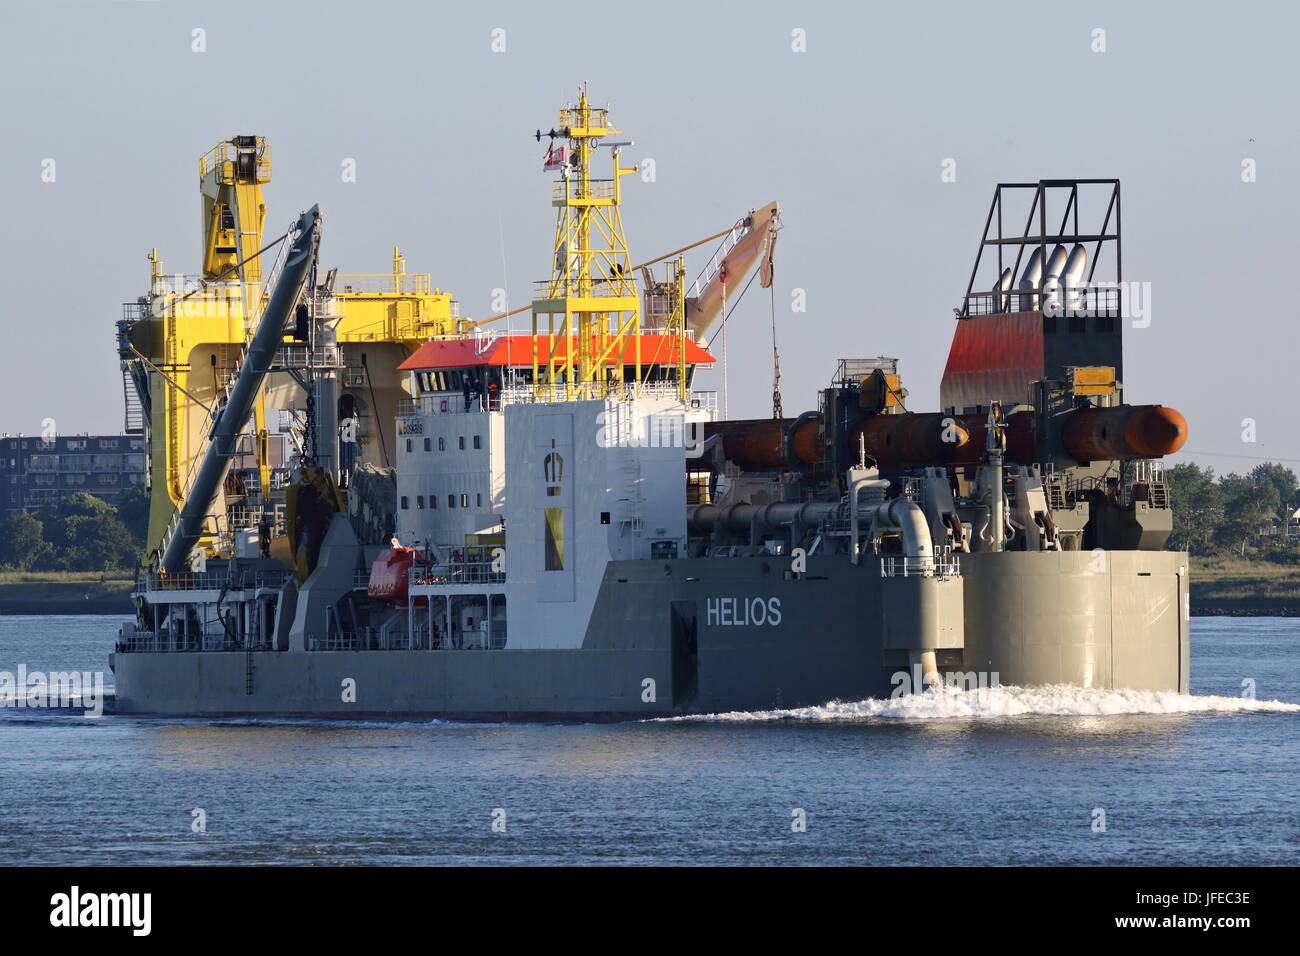 The new Cutter Suction Dredger Helios enters the port of Rotterdam. Stock Photo